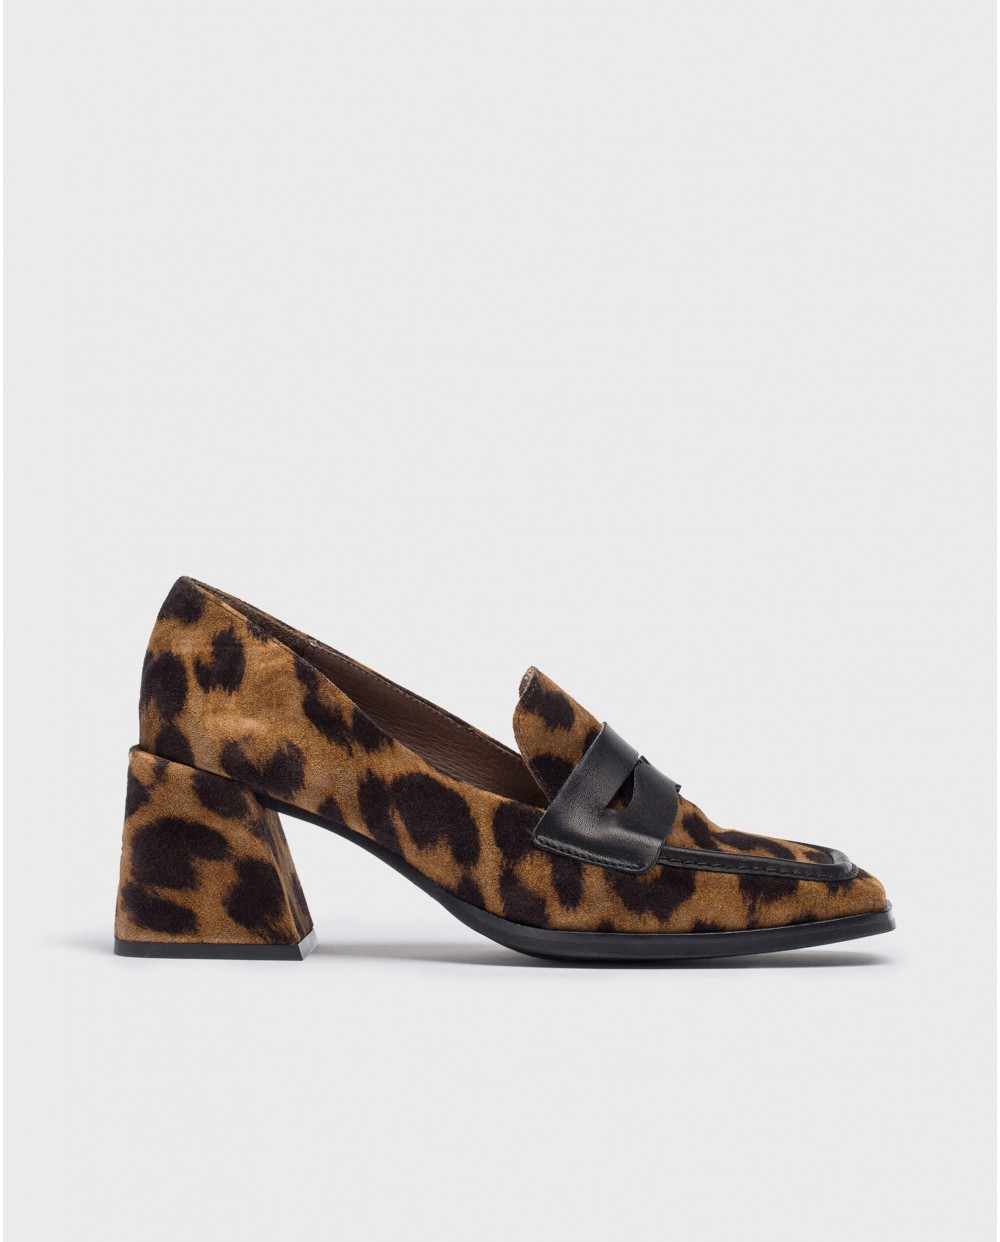 Wonders-Loafers and ballerines-Leopard FIODOR moccasin